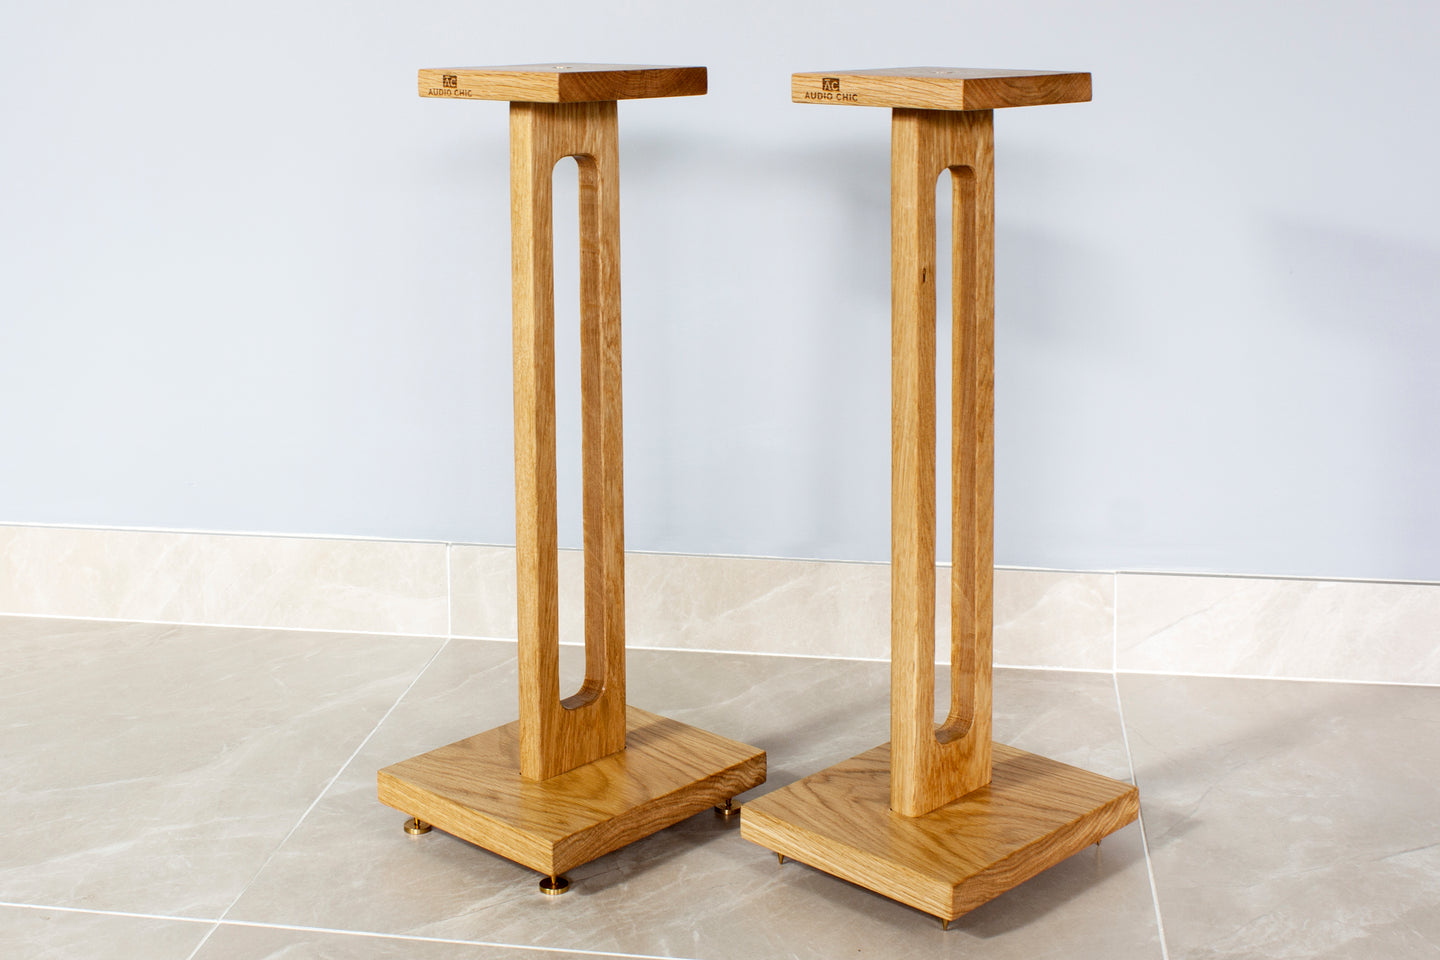 Harmony Solid Oak Speaker Stand (Pair) 700mm, 600mm, 500mm - AUDIO CHIC